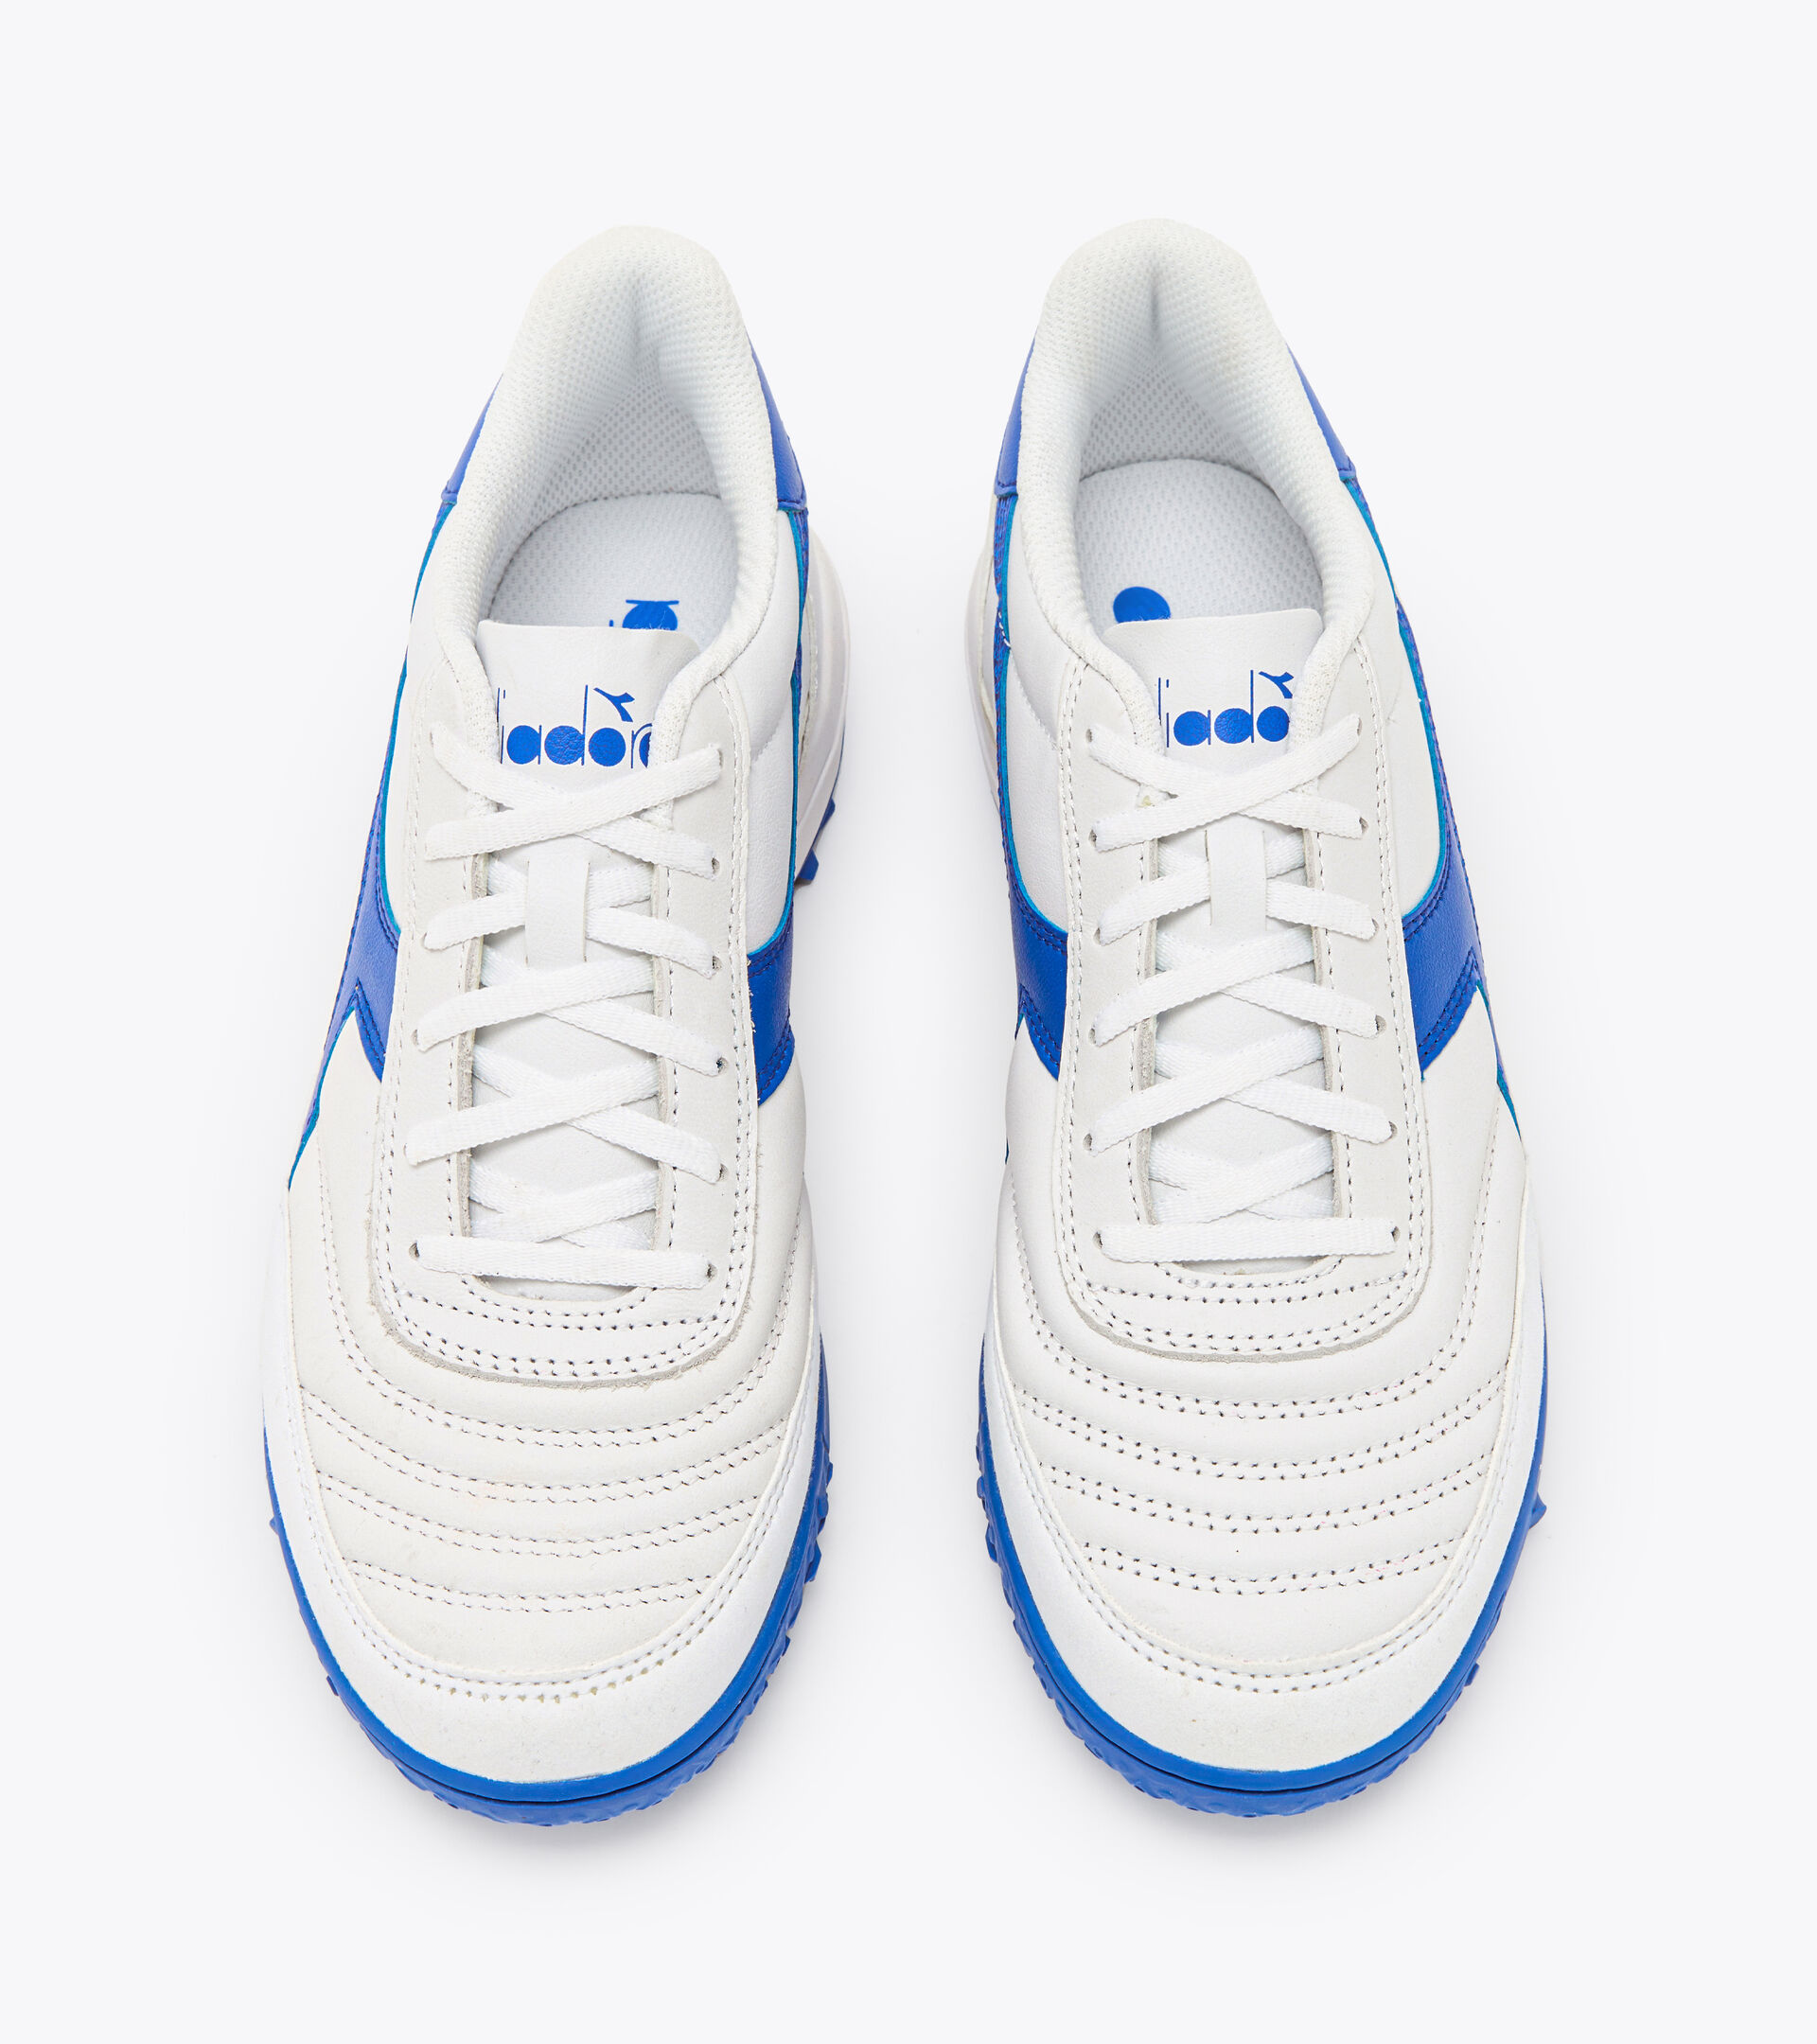 Futsal boot - Specific outsole for synthetic/hard grounds CALCETTO II LT TF OPTICAL WHITE/ROYAL BLUE - Diadora